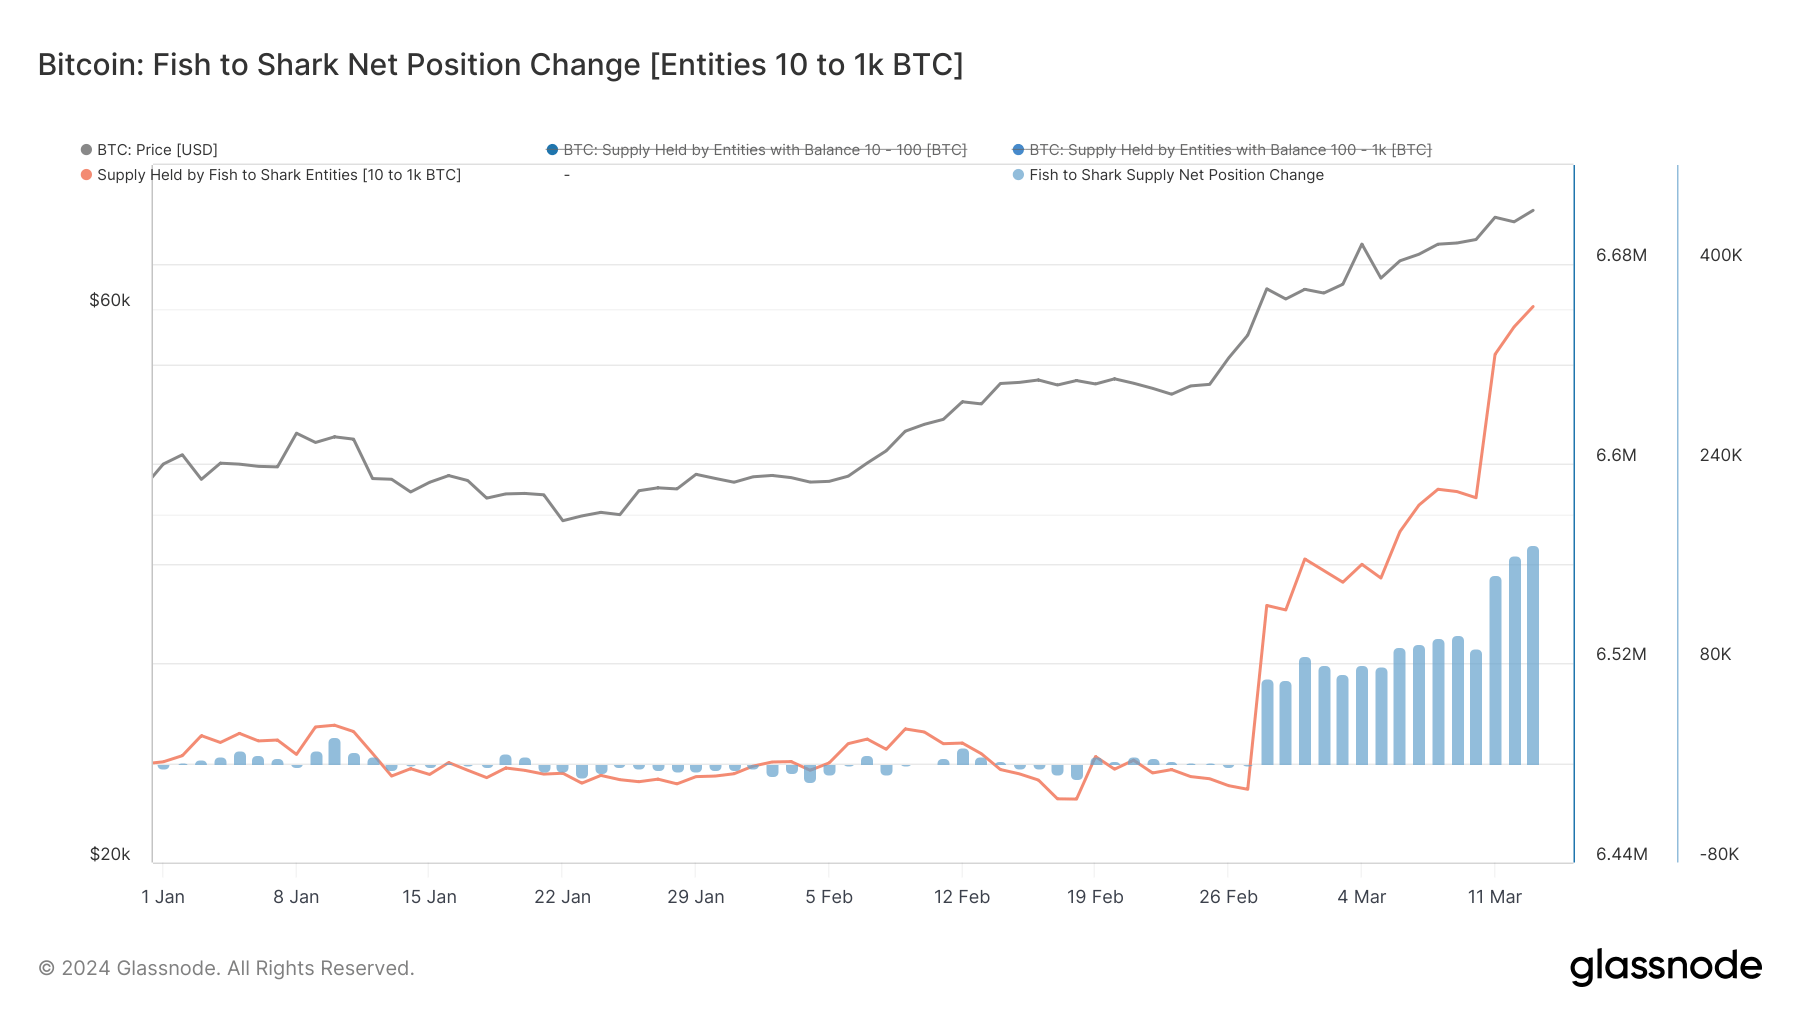 Bitcoin’s position change from fish to shark supply chain (since the beginning of the year)